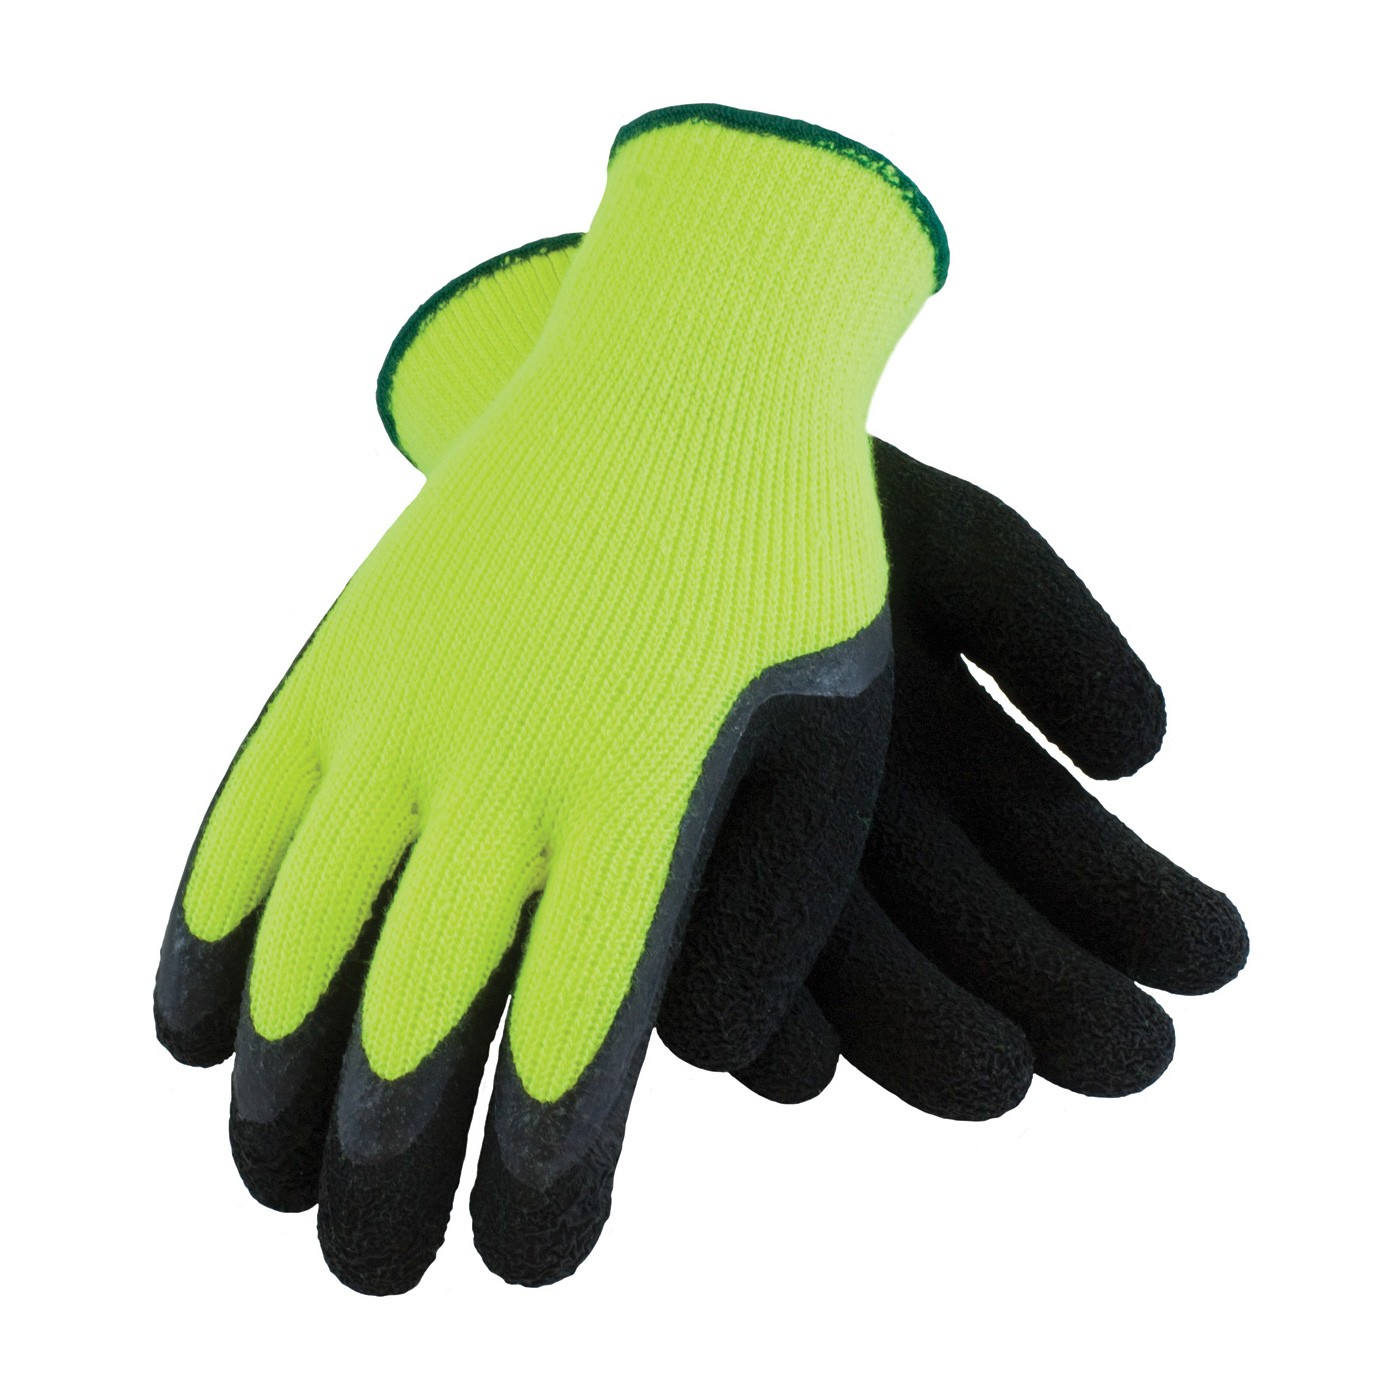 Hi-Vis Lime Grn. Acrylic Terry Shell, Blk. Latex Foam Finish Size X-Large